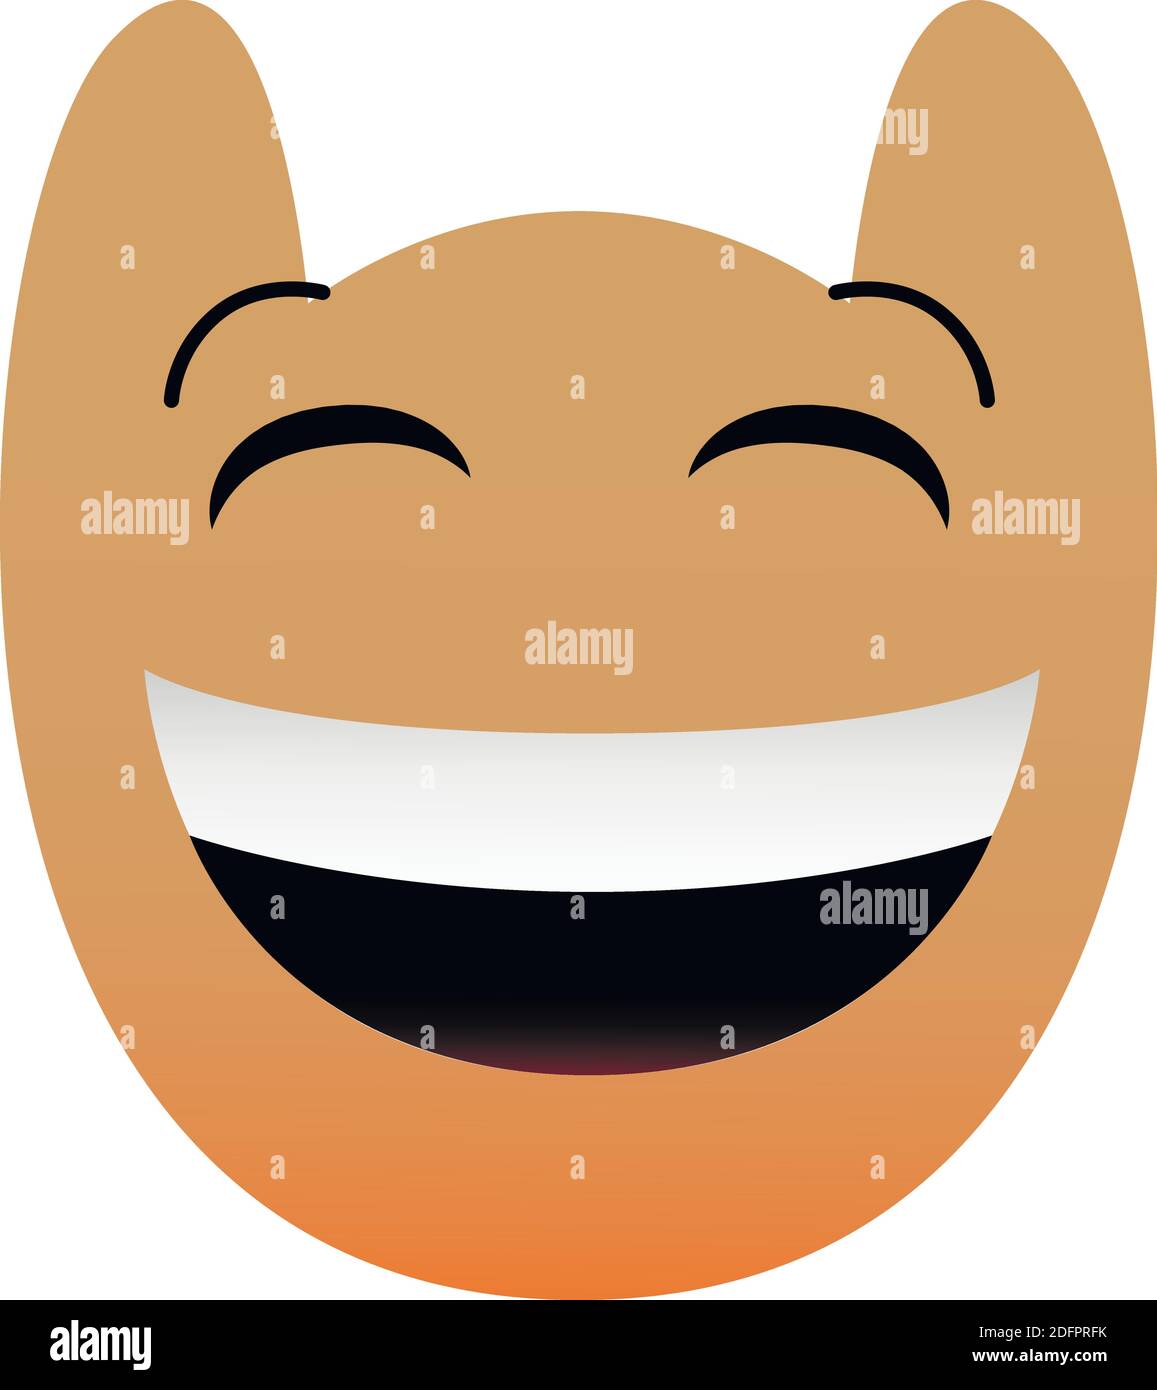 Its a laugh Stock Vector Images - Alamy